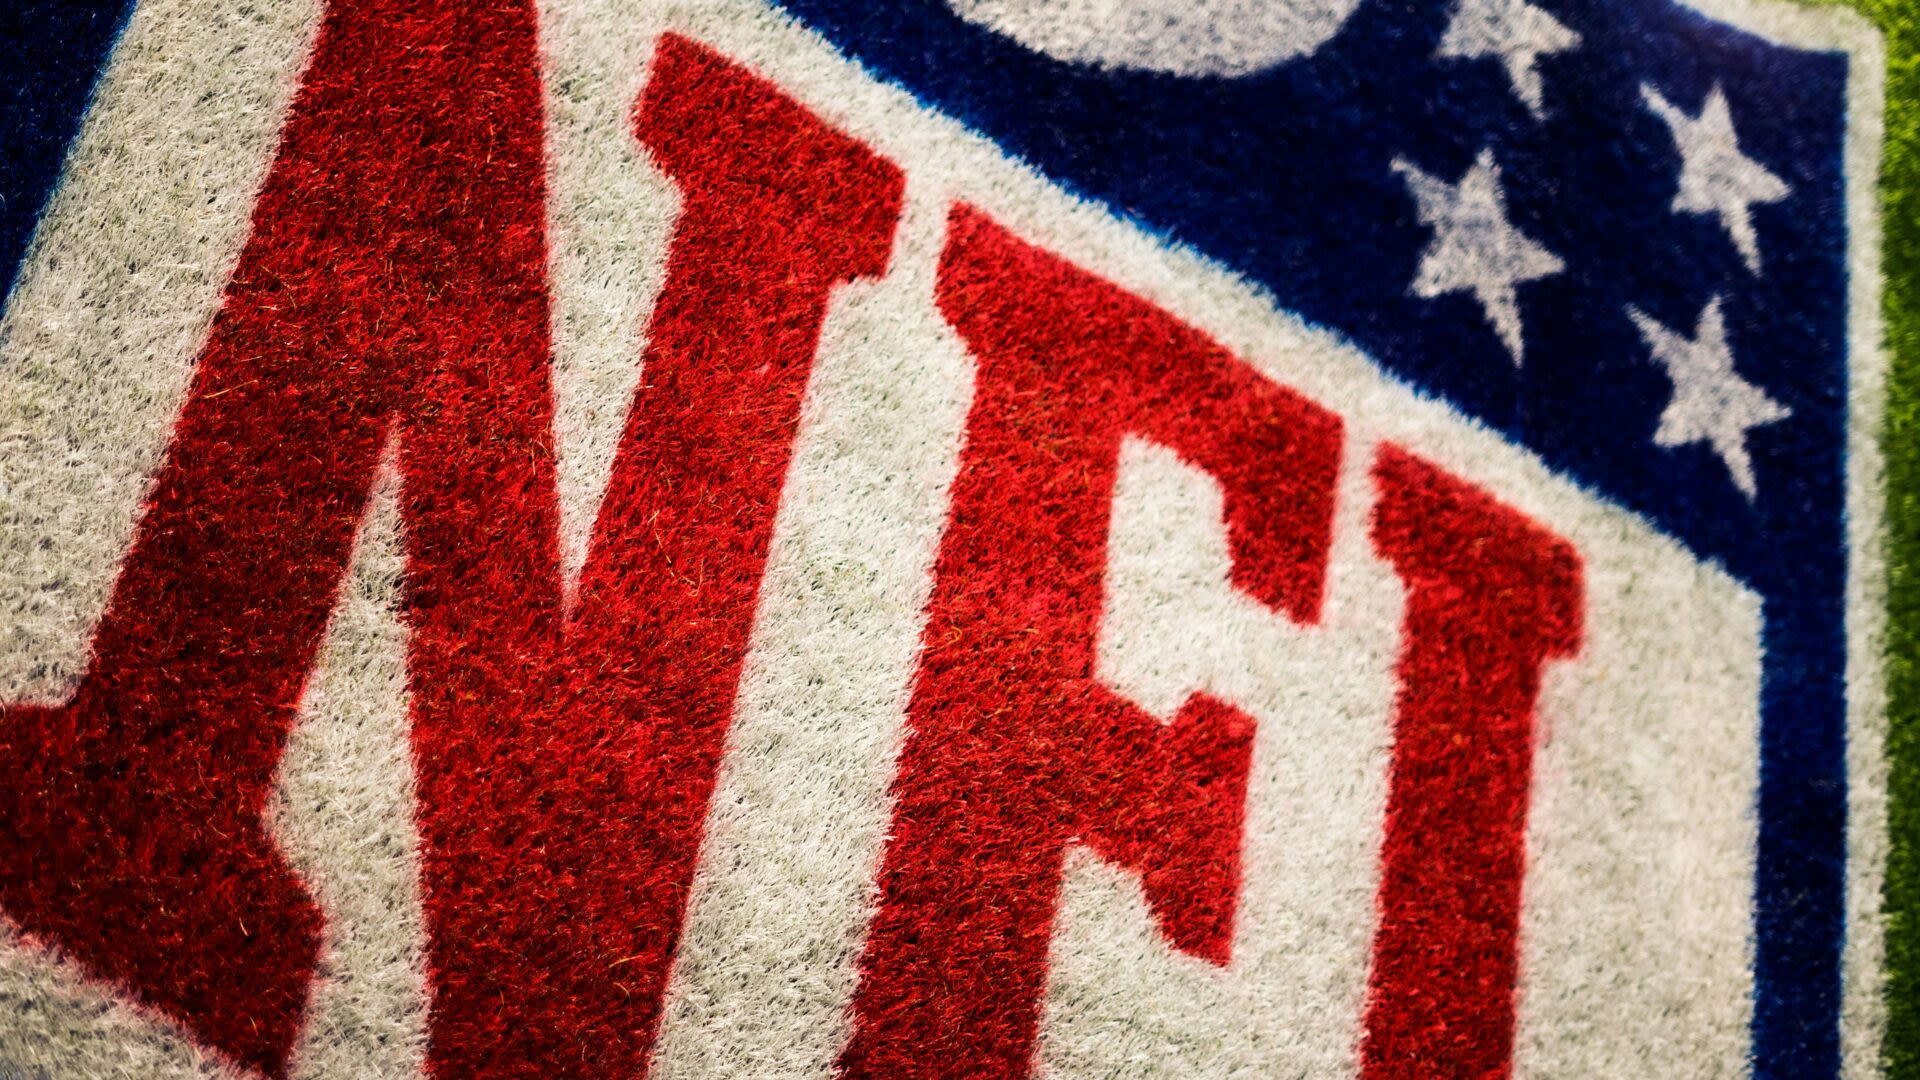 NFL Will Likely Make $25 Billion in Yearly Revenue By 2027